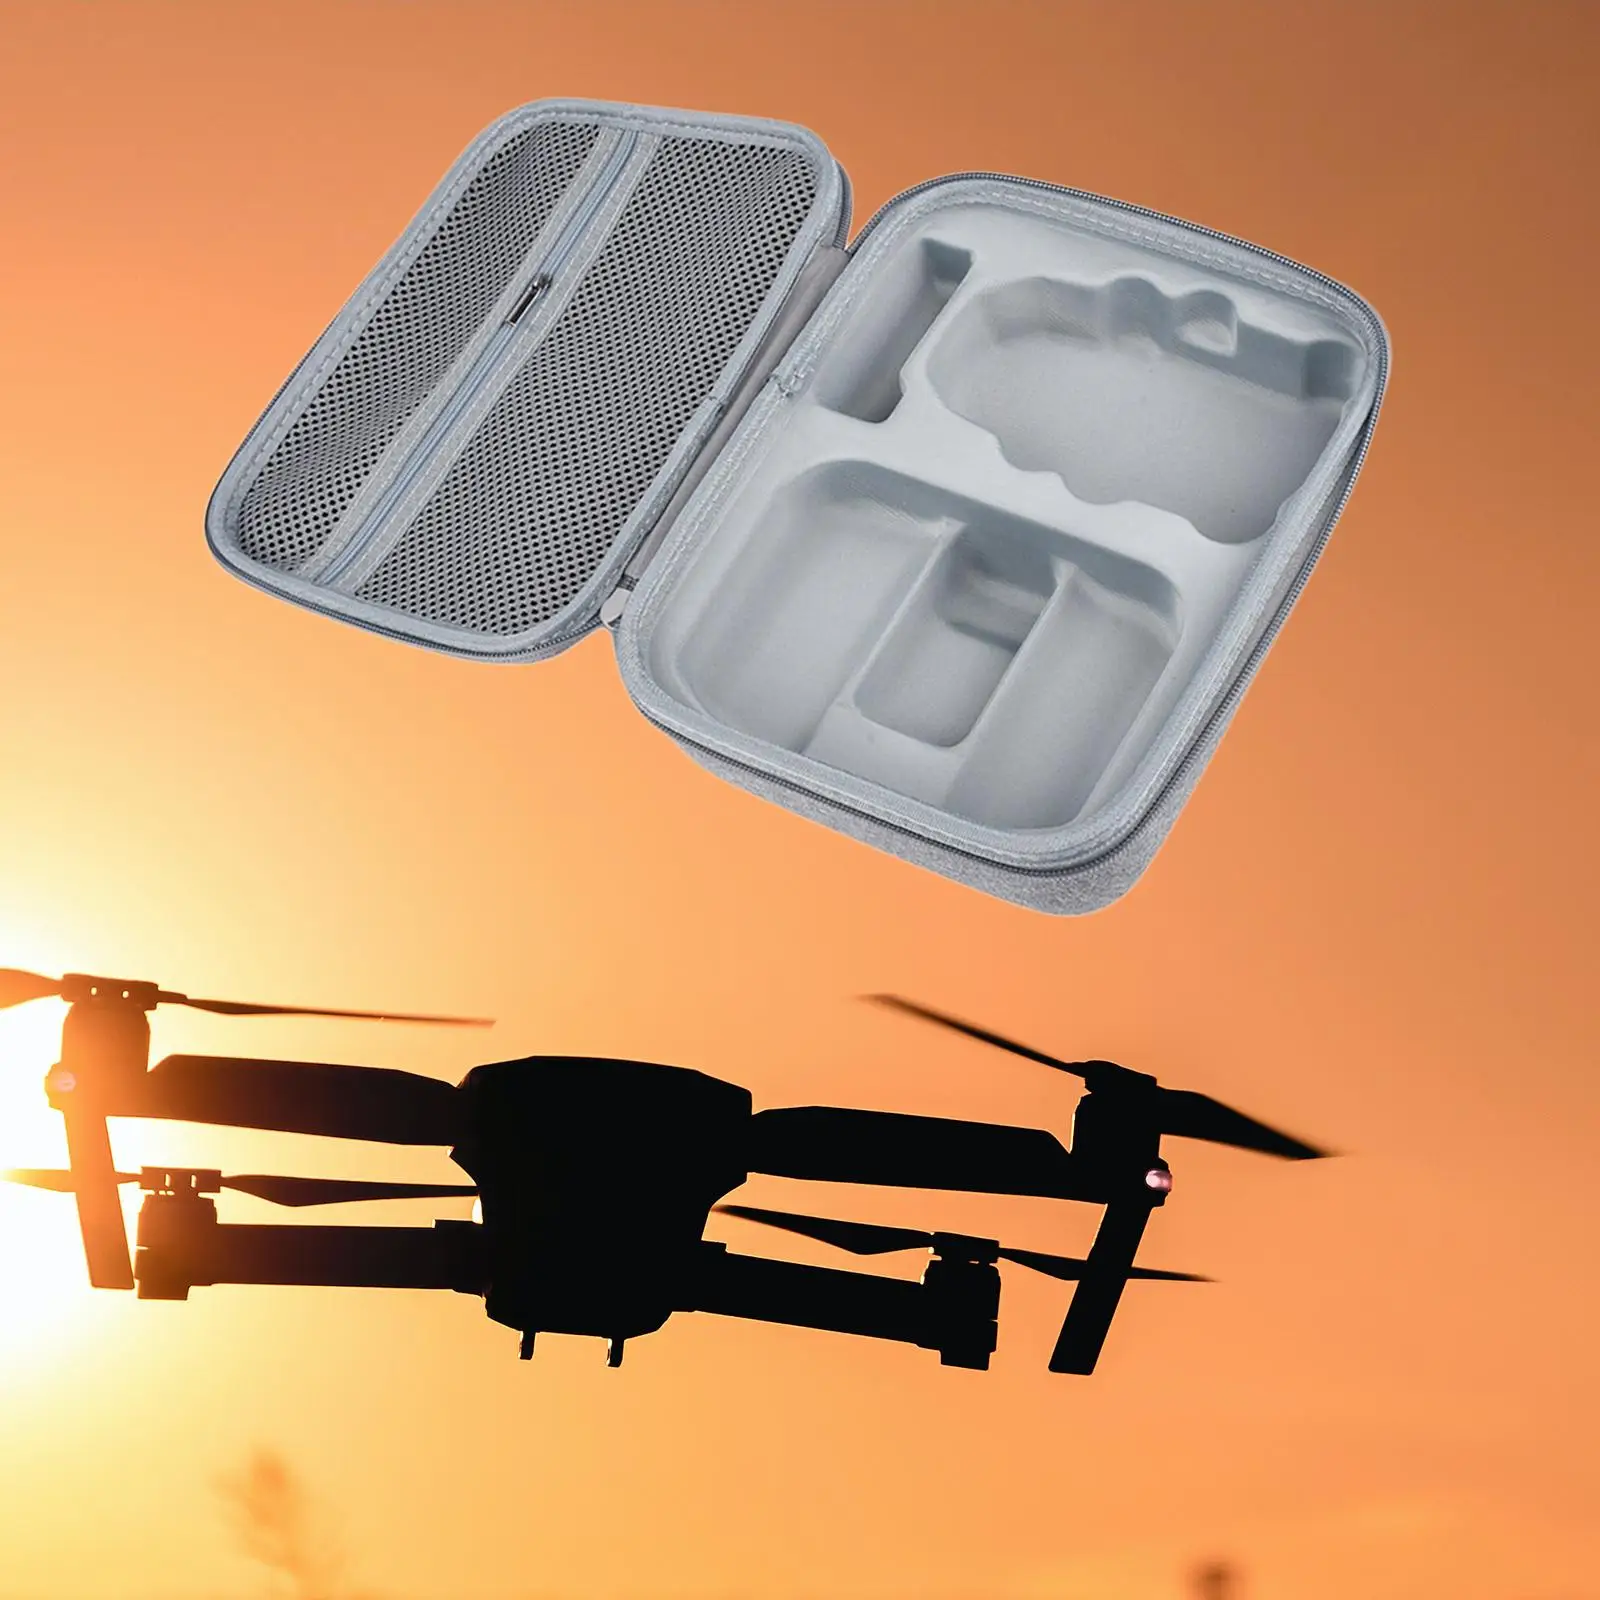 Drone Carrying Case Protective Case Storage Box for Mini 2 Quadcopter Parts